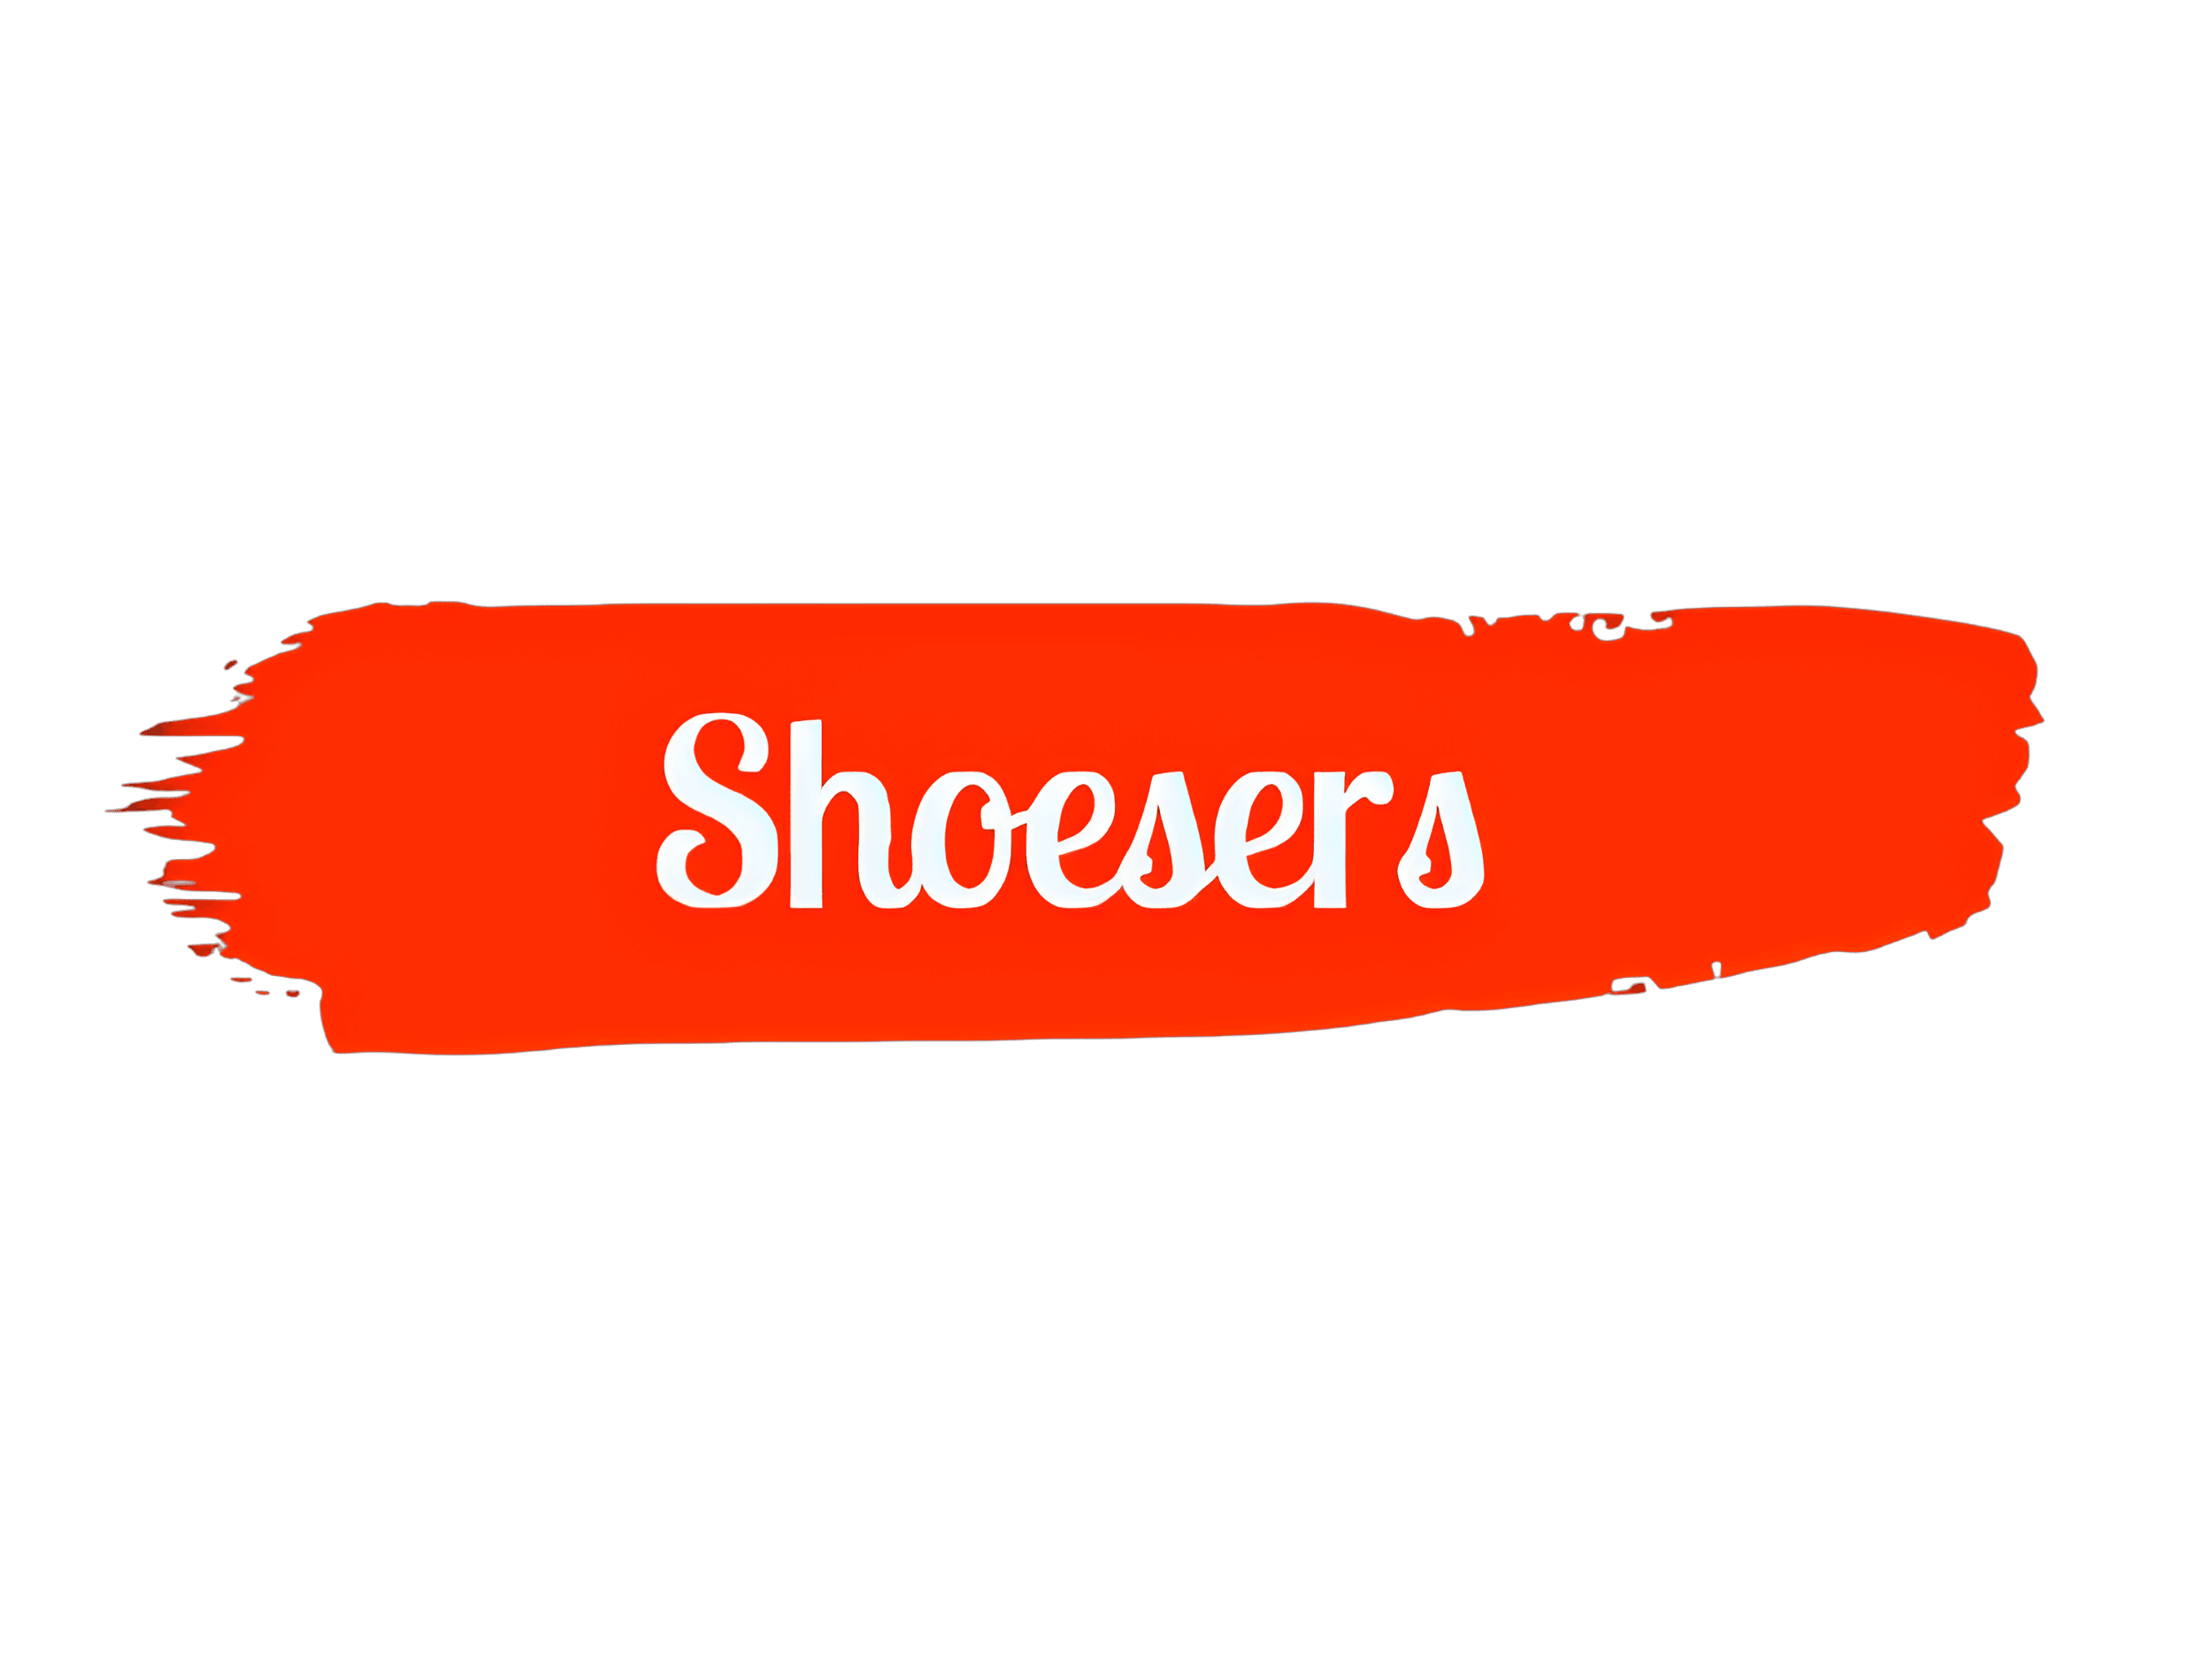 Shoesers